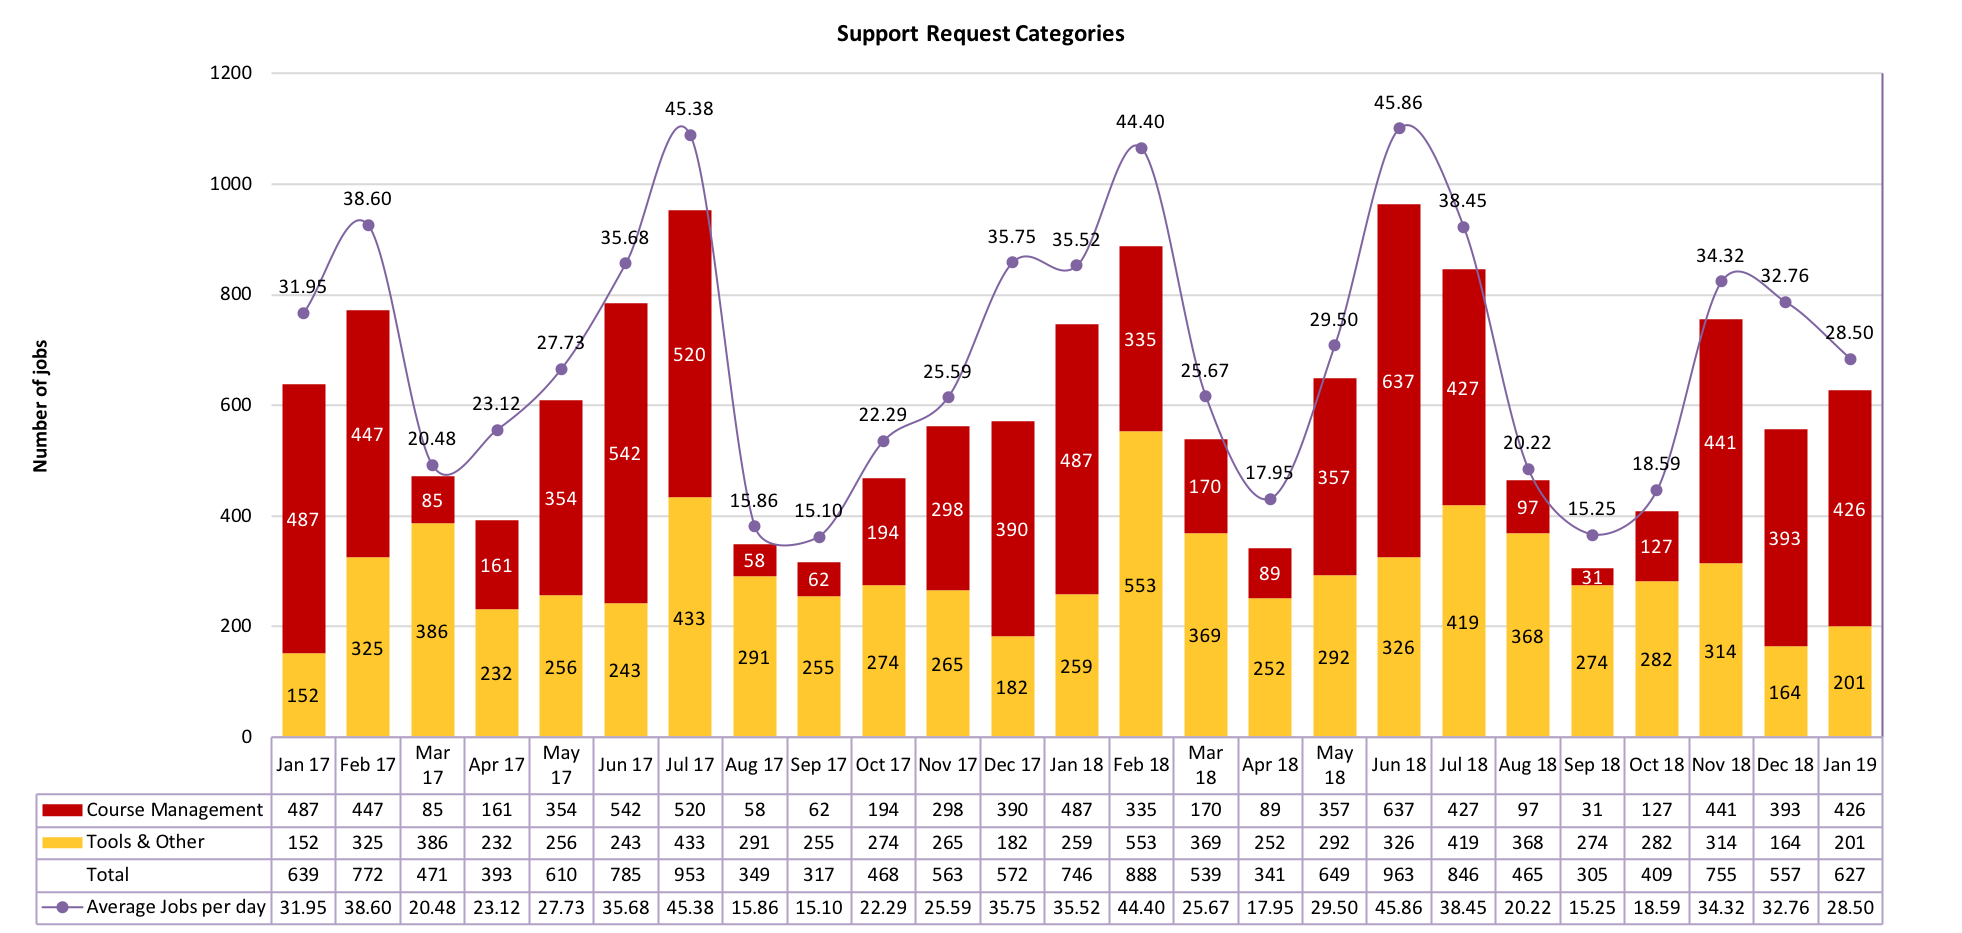 Chart of Support Request Categories from January 2017 to January 2019